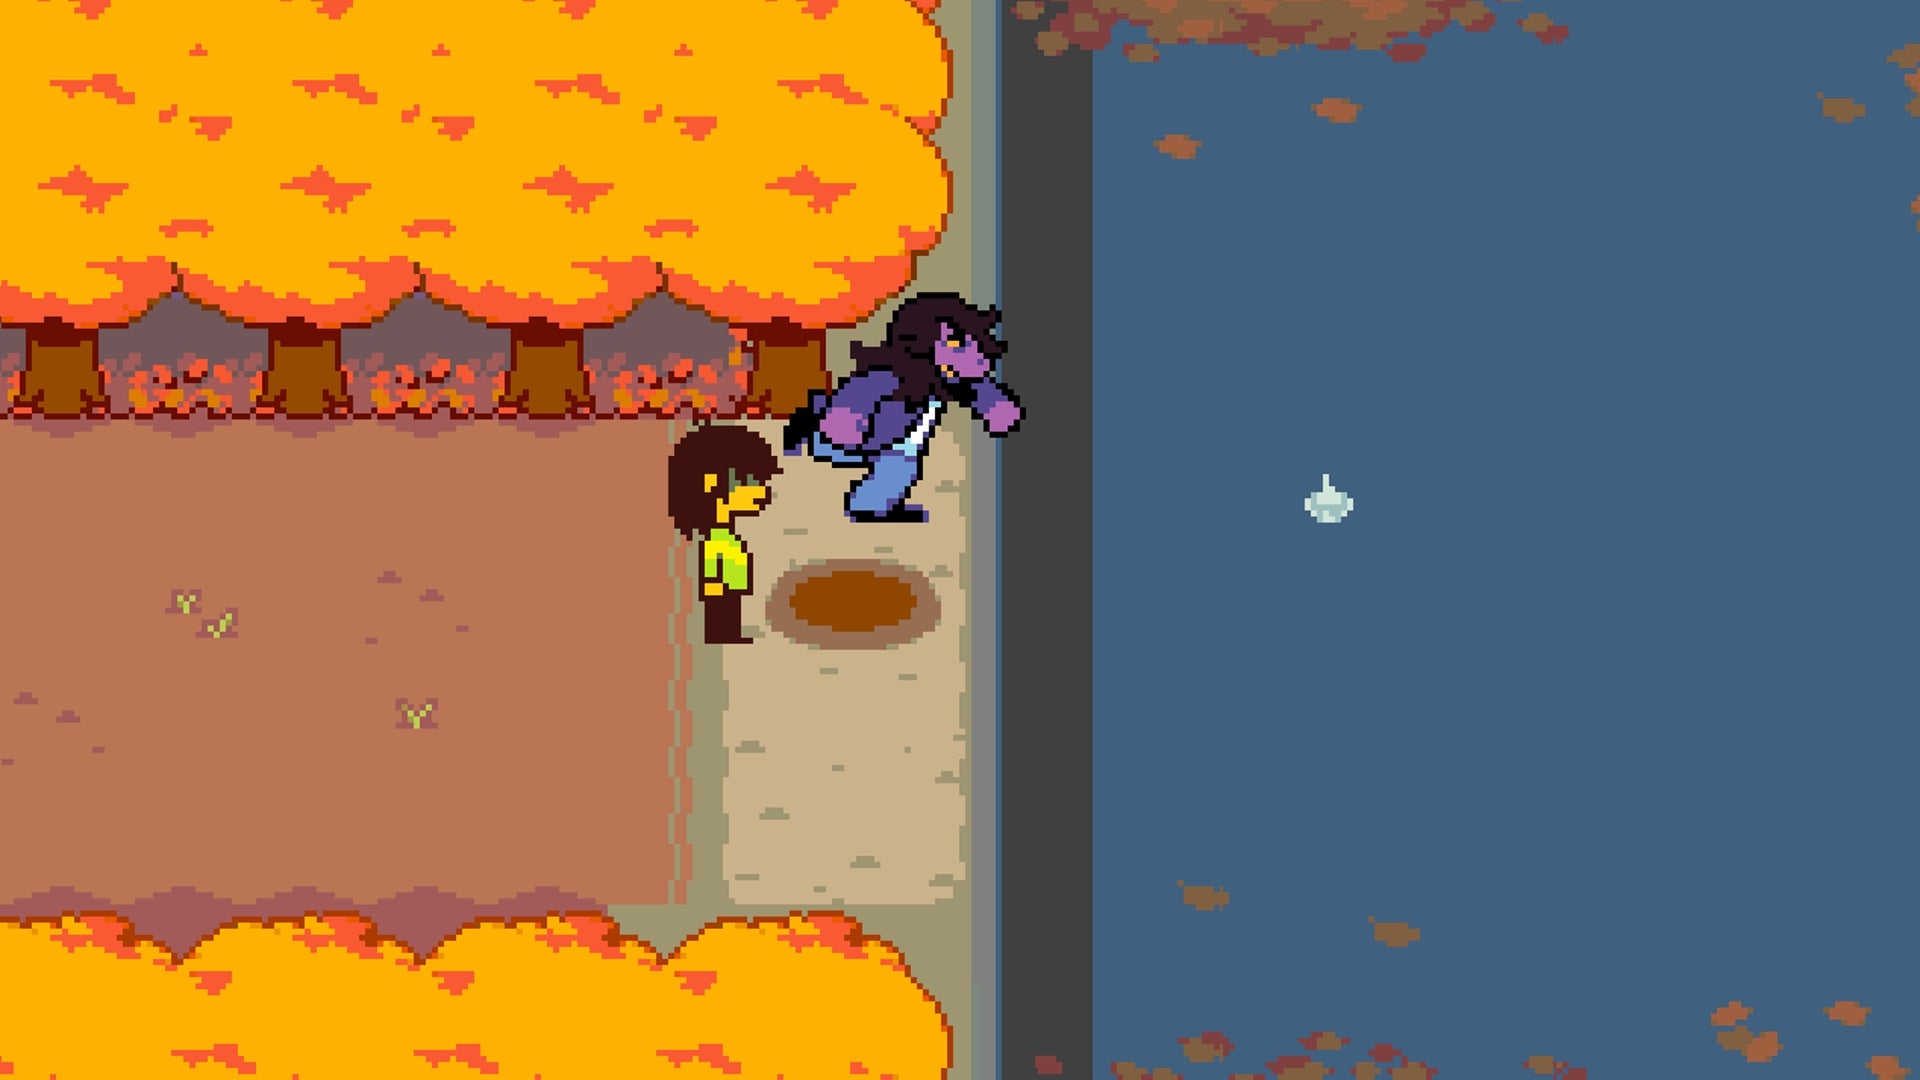 Deltarune is the next RPG from Undertale creator Toby Fox.